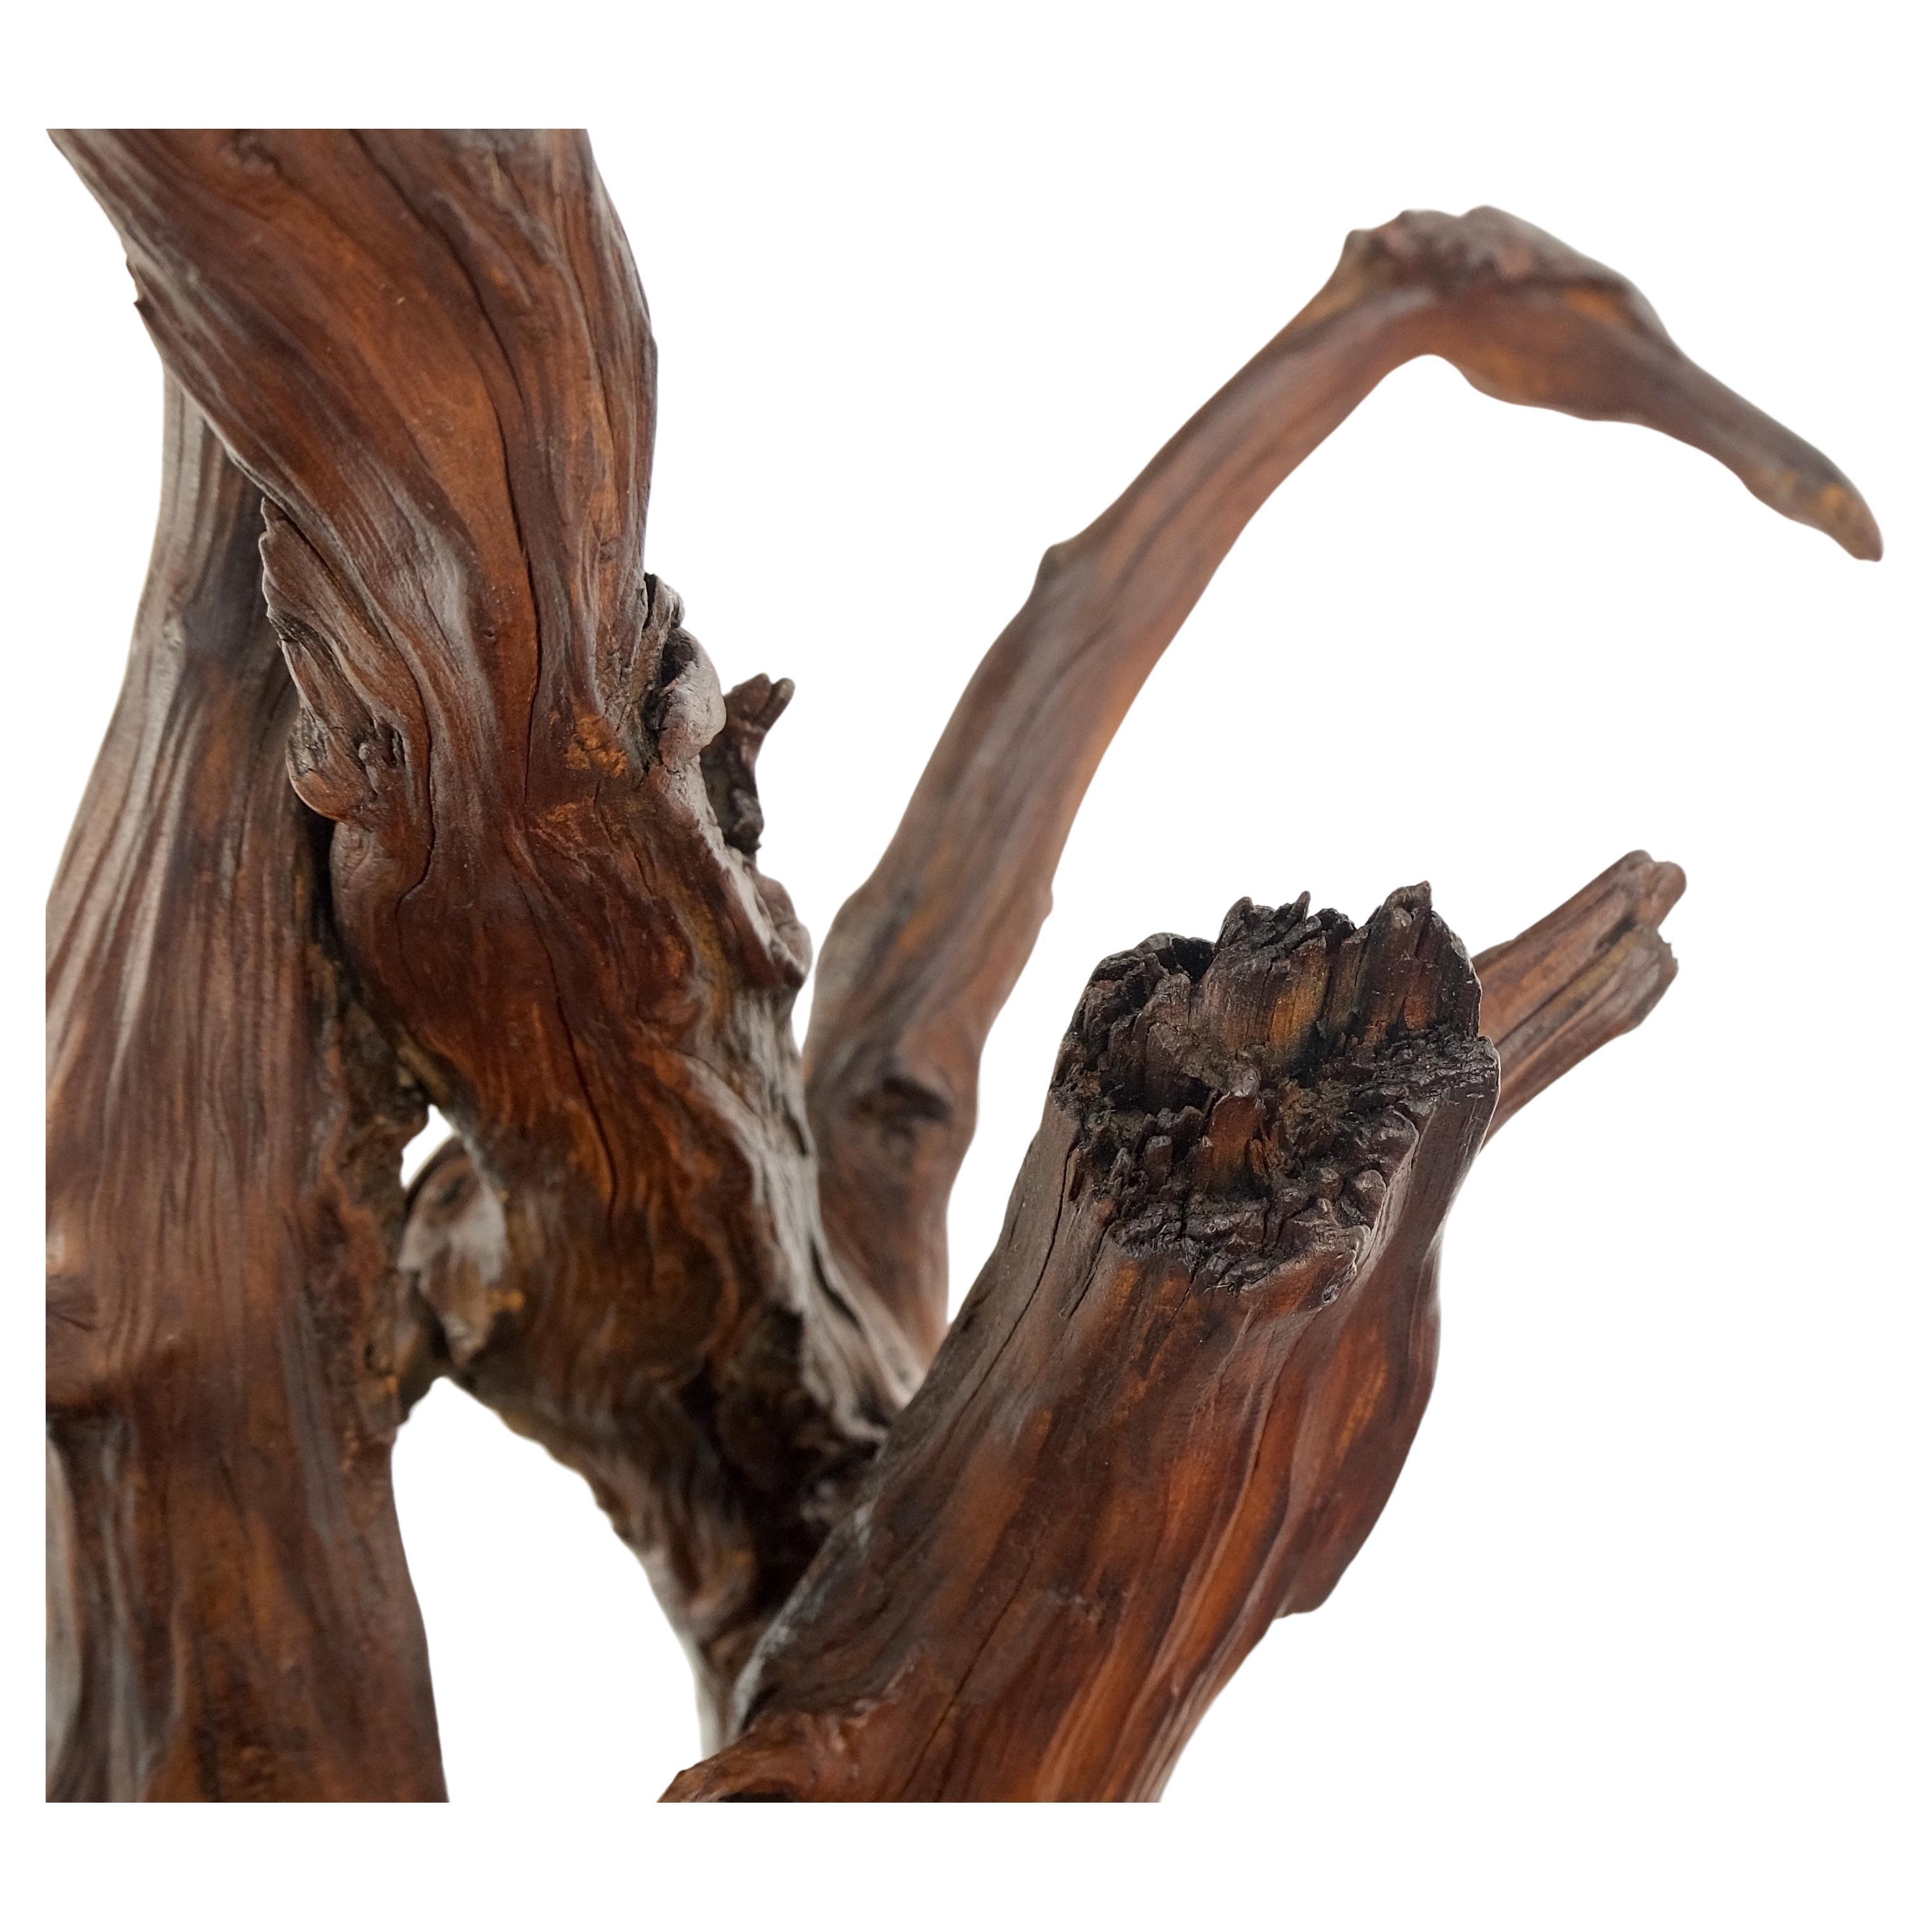 Lacquered Solid Driftwood Root Sculpture Organic Jewerly Display Nice Patina & Shape Mint! For Sale